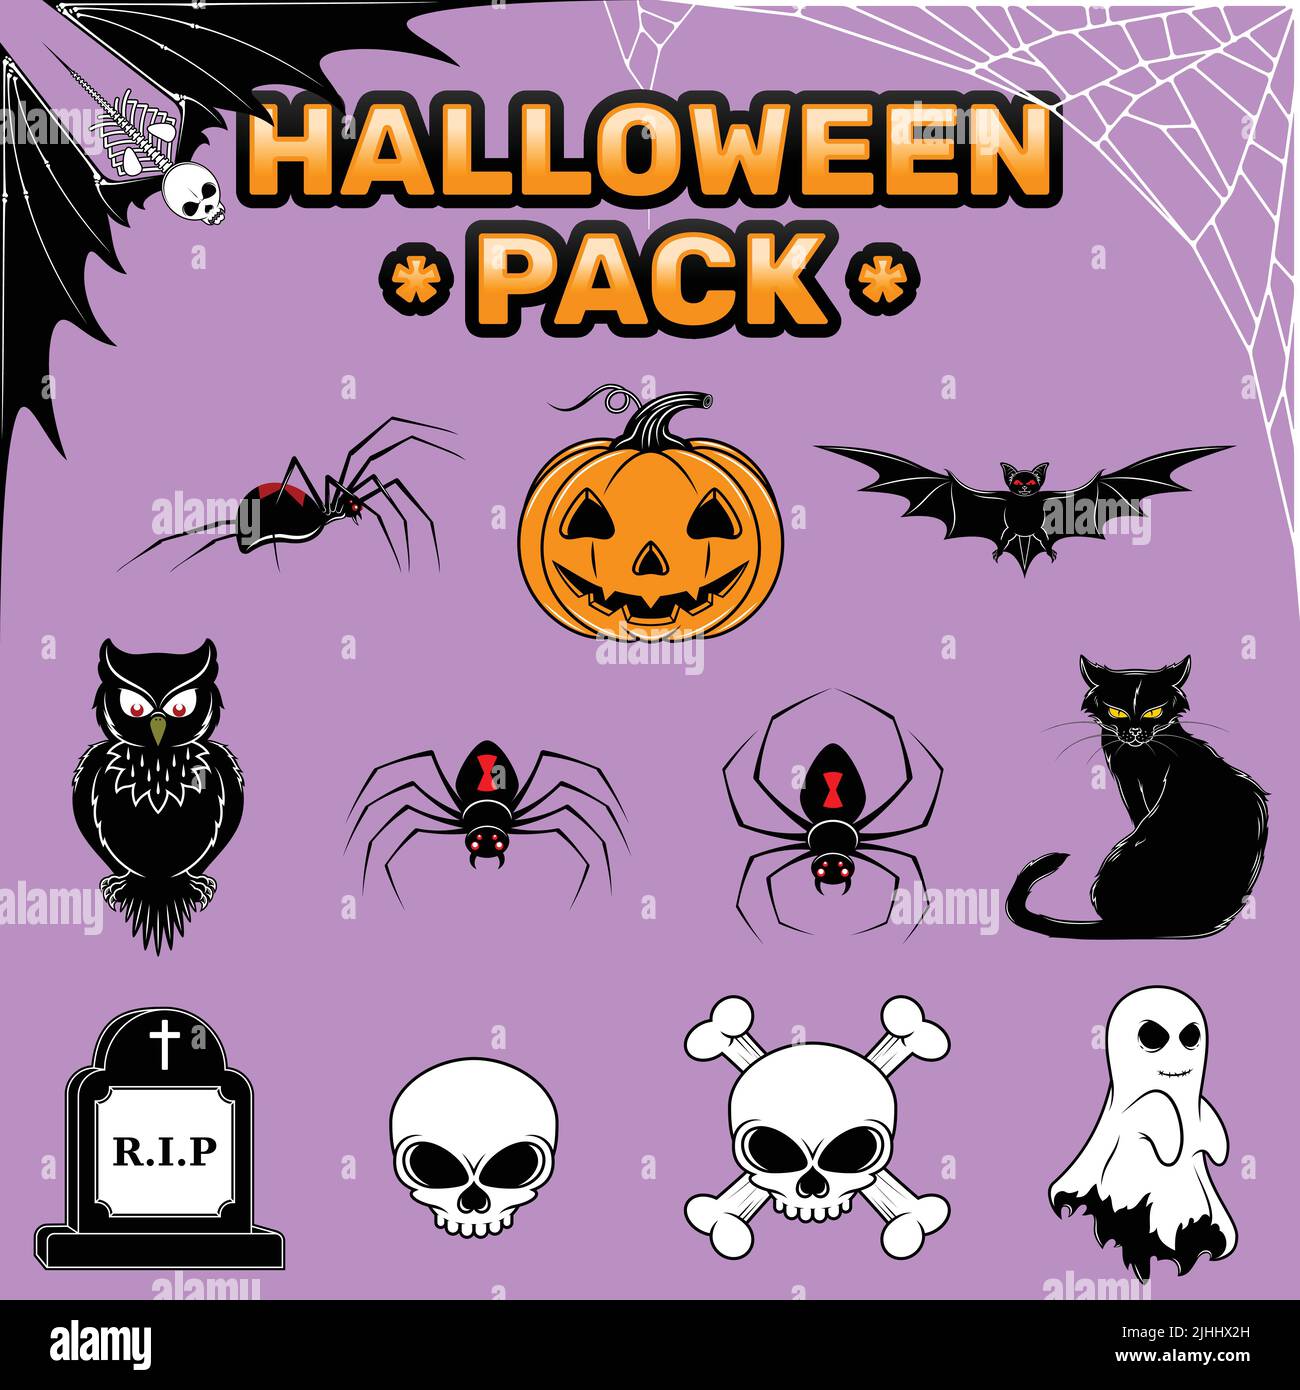 Vector design of pack of characteristic element of Halloween day. Halloween pack with bat, ghost, black cat, spiders, skulls and pumpkin Stock Vector